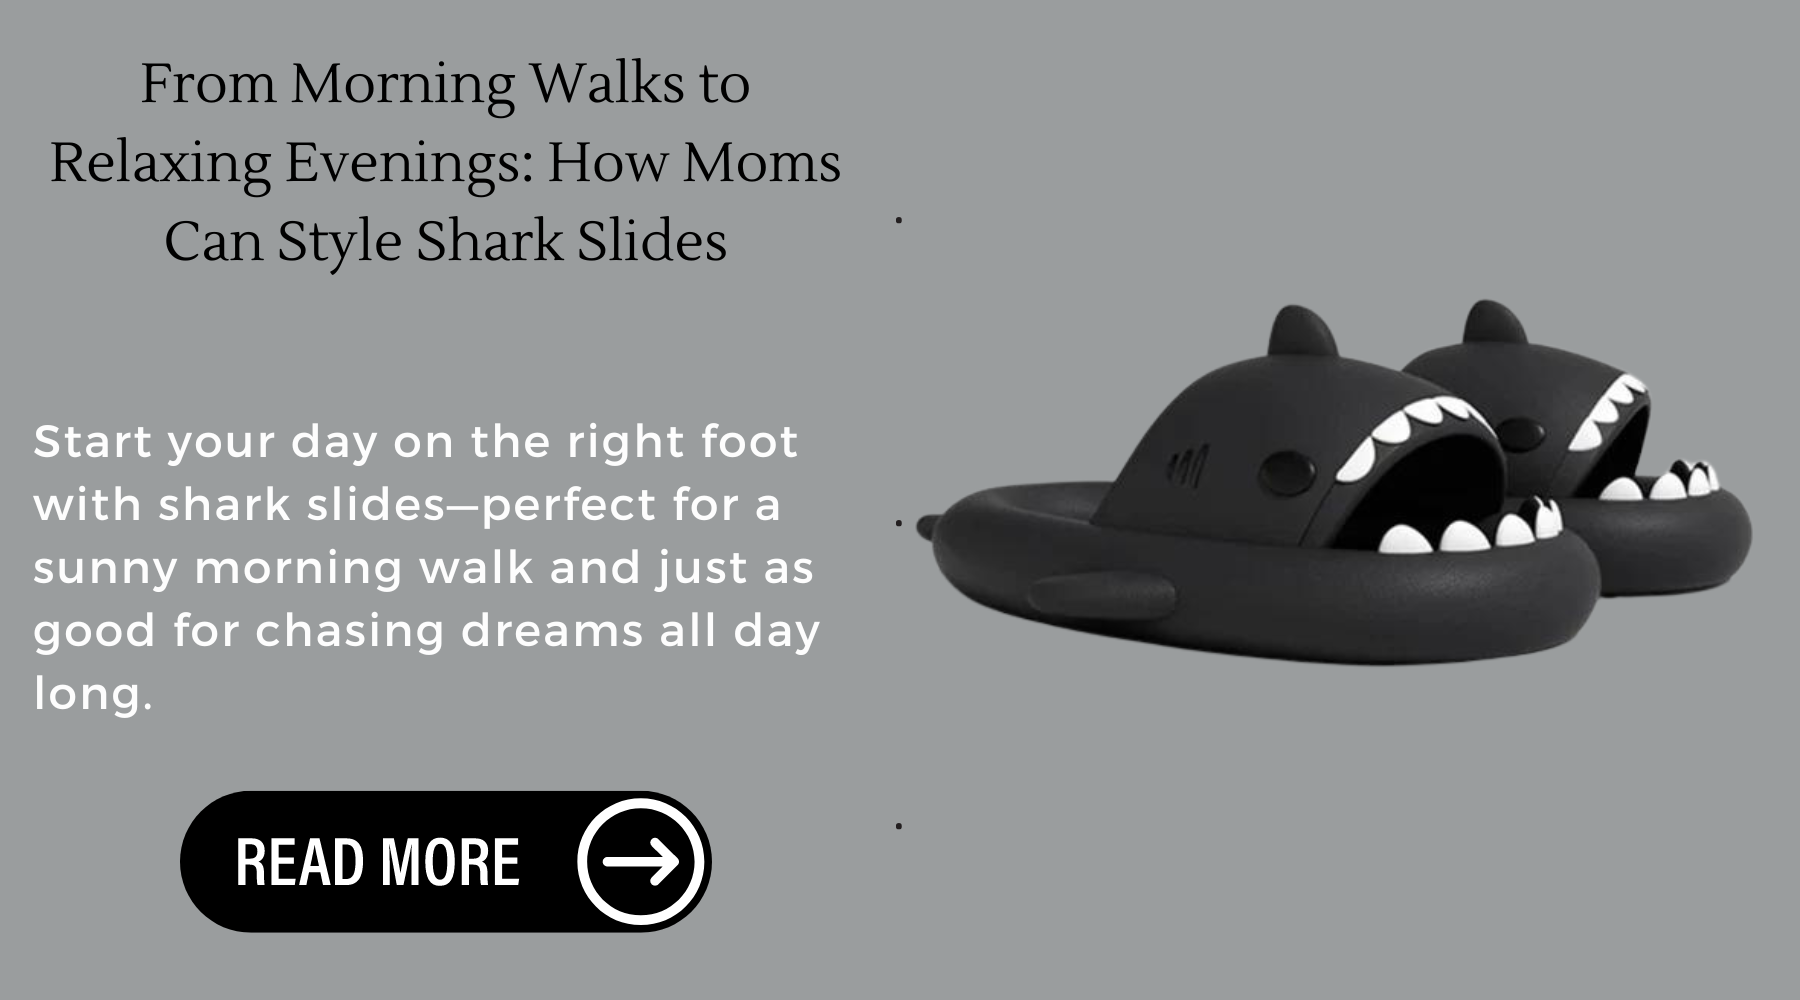 From Morning Walks to Relaxing Evenings: How Moms Can Style Shark Slides